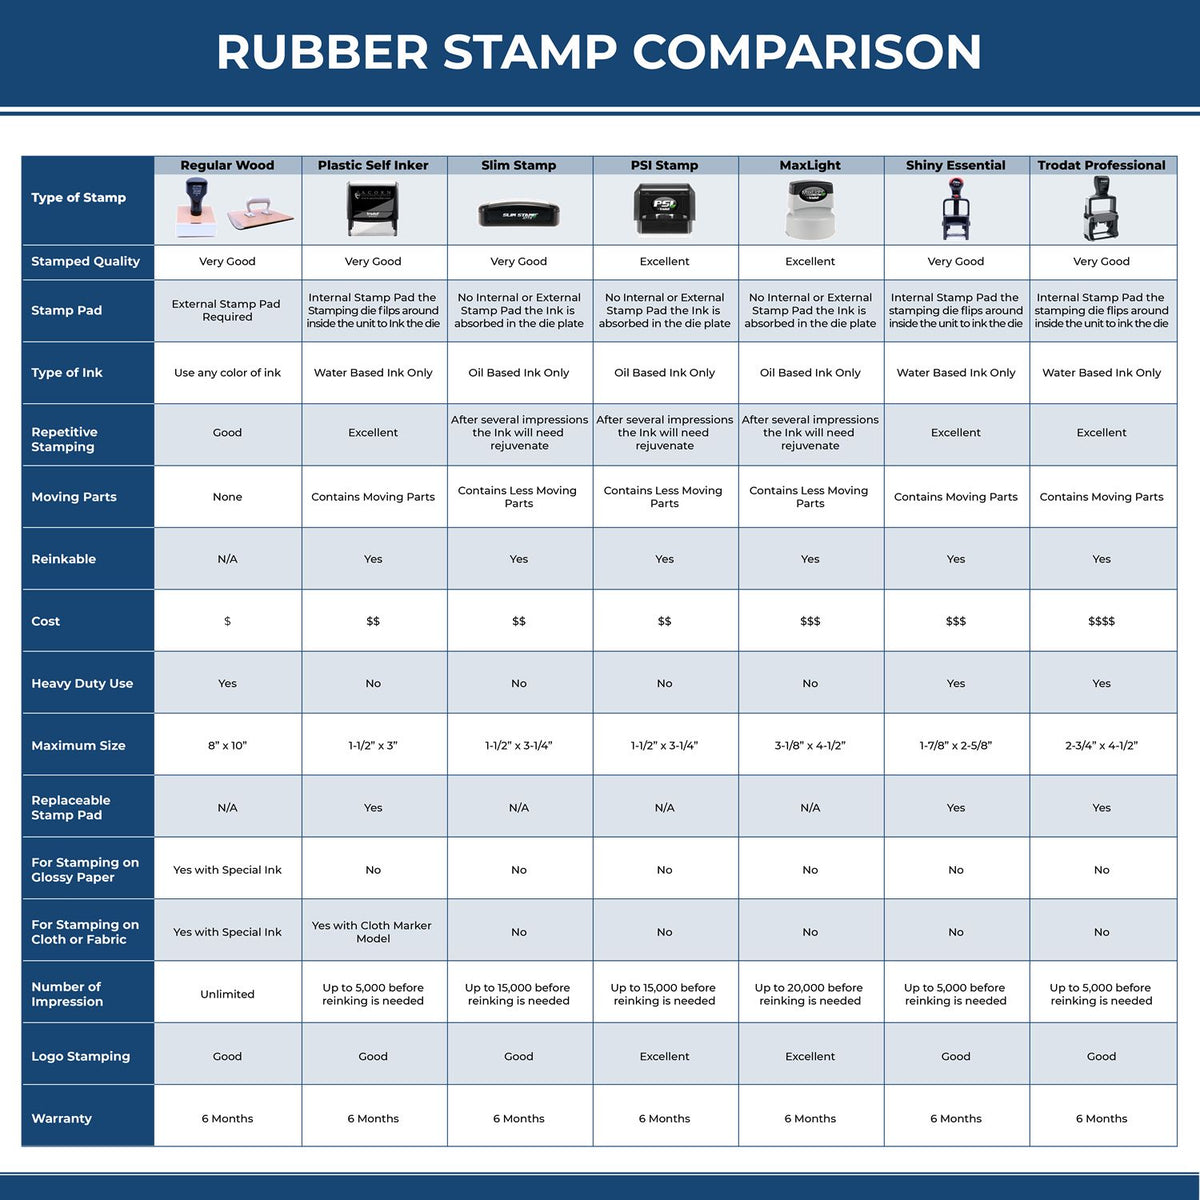 A comparison chart for the different types of mount models available for the Indiana Professional Engineer Seal Stamp.